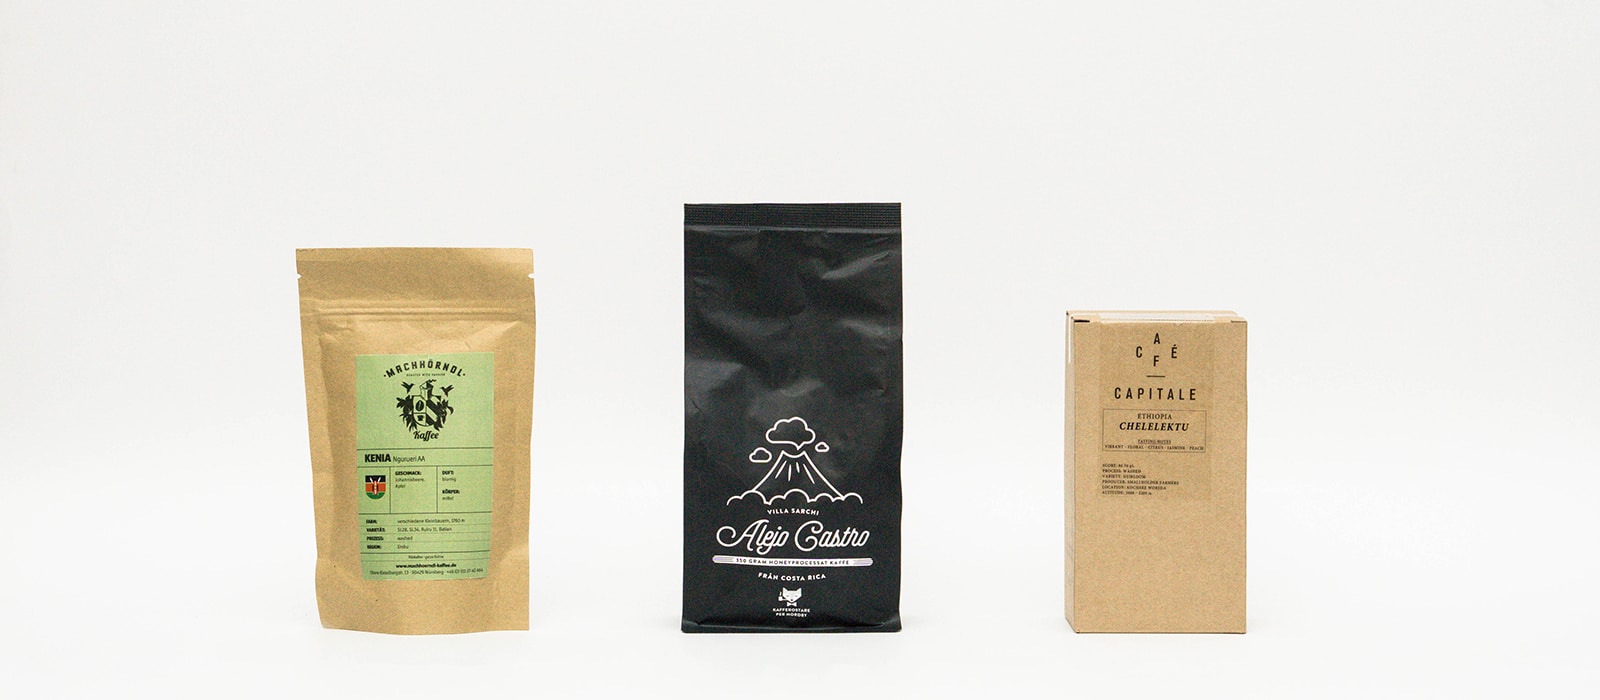 Three outstanding coffees from three great roasters